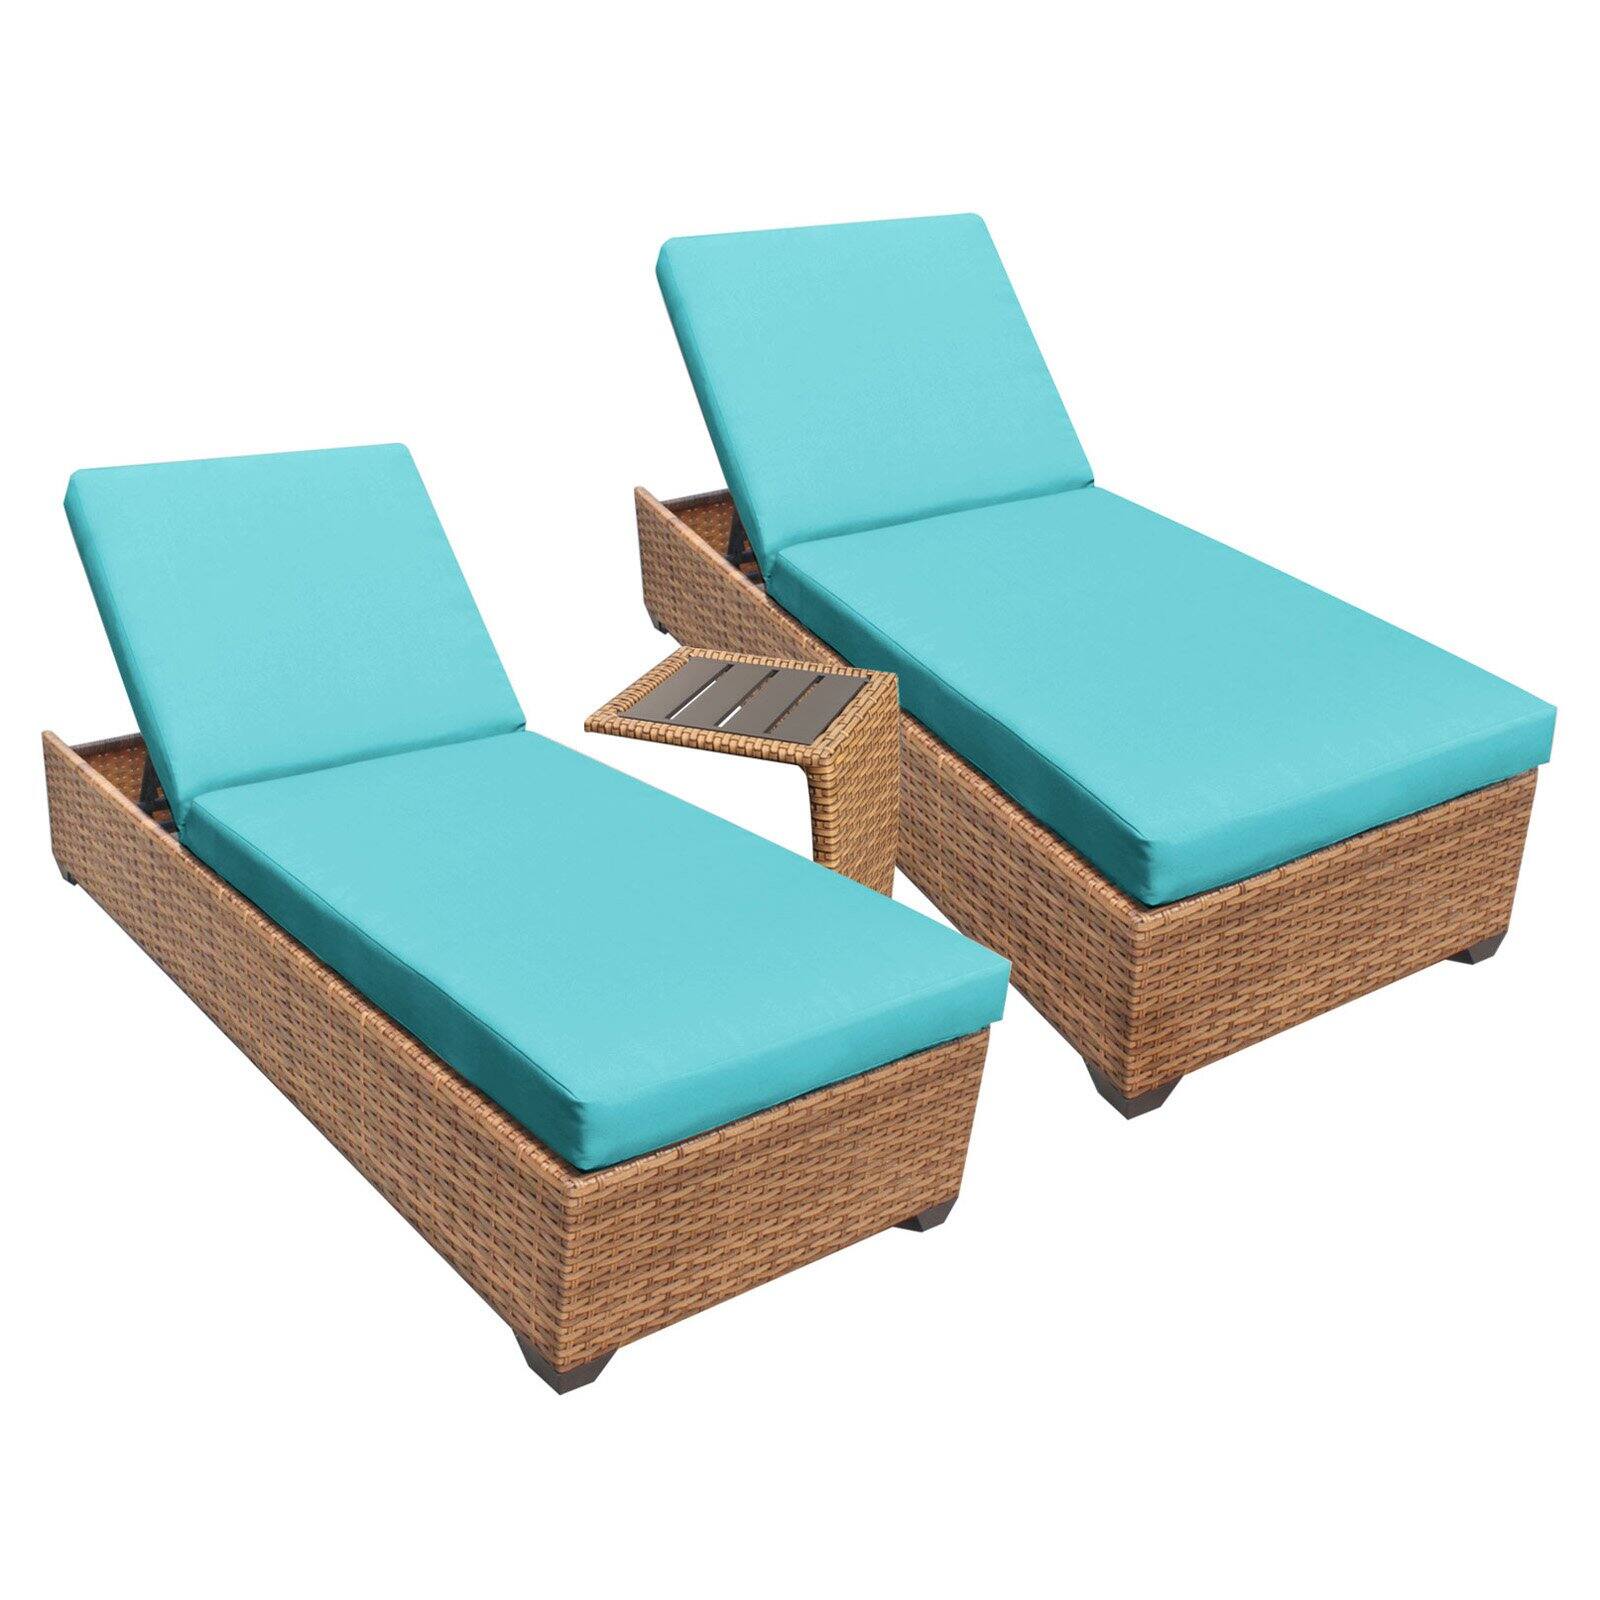 TK Classics Laguna Outdoor Chaise Lounge with Side Table - Set of 2 Chairs and Cushion Covers - image 2 of 2